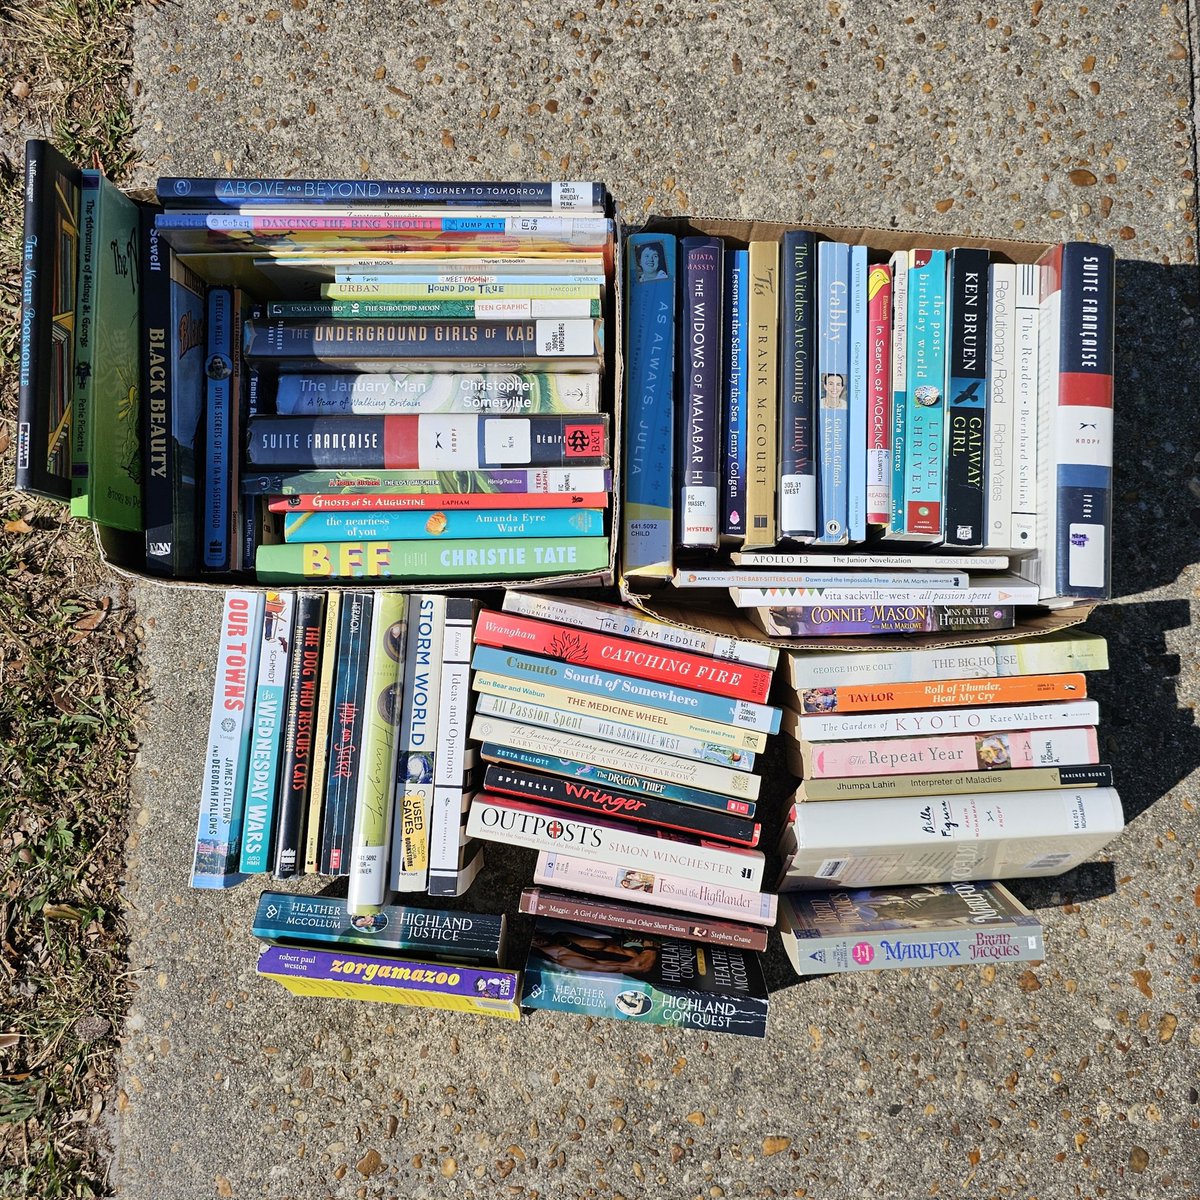 Took a trip out to the @jaxlibrary Beaches branch to shop their book sale. Look out for these books hitting a Historic Springfield #littlefreelibrary sometime this week.